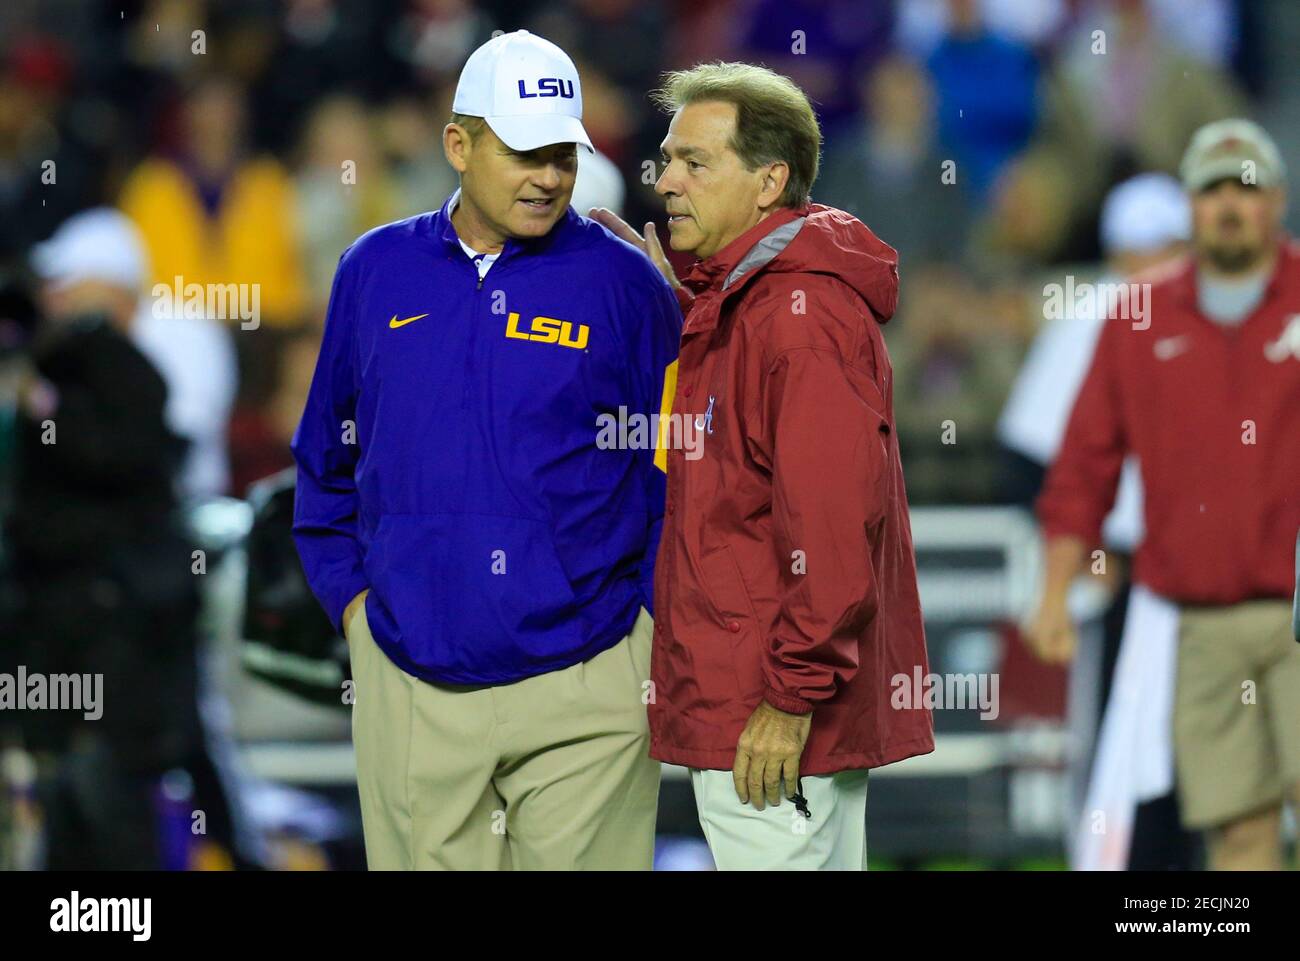 Nov 7, 2015; Tuscaloosa, AL, USA; Alabama Crimson Tide head coach Nick Saban and LSU Tigers head coach Les Miles greet each other prior to the game at Bryant-Denny Stadium. Mandatory Credit: Marvin Gentry-USA TODAY Sports  / Reuters  Picture Supplied by Action Images   (TAGS: Sport American Football NCAA) *** Local Caption *** 2015-11-08T005204Z 1462766991 NOCID RTRMADP 3 NCAA-FOOTBALL-LOUISIANA-STATE-AT-ALABAMA.JPG Stock Photo